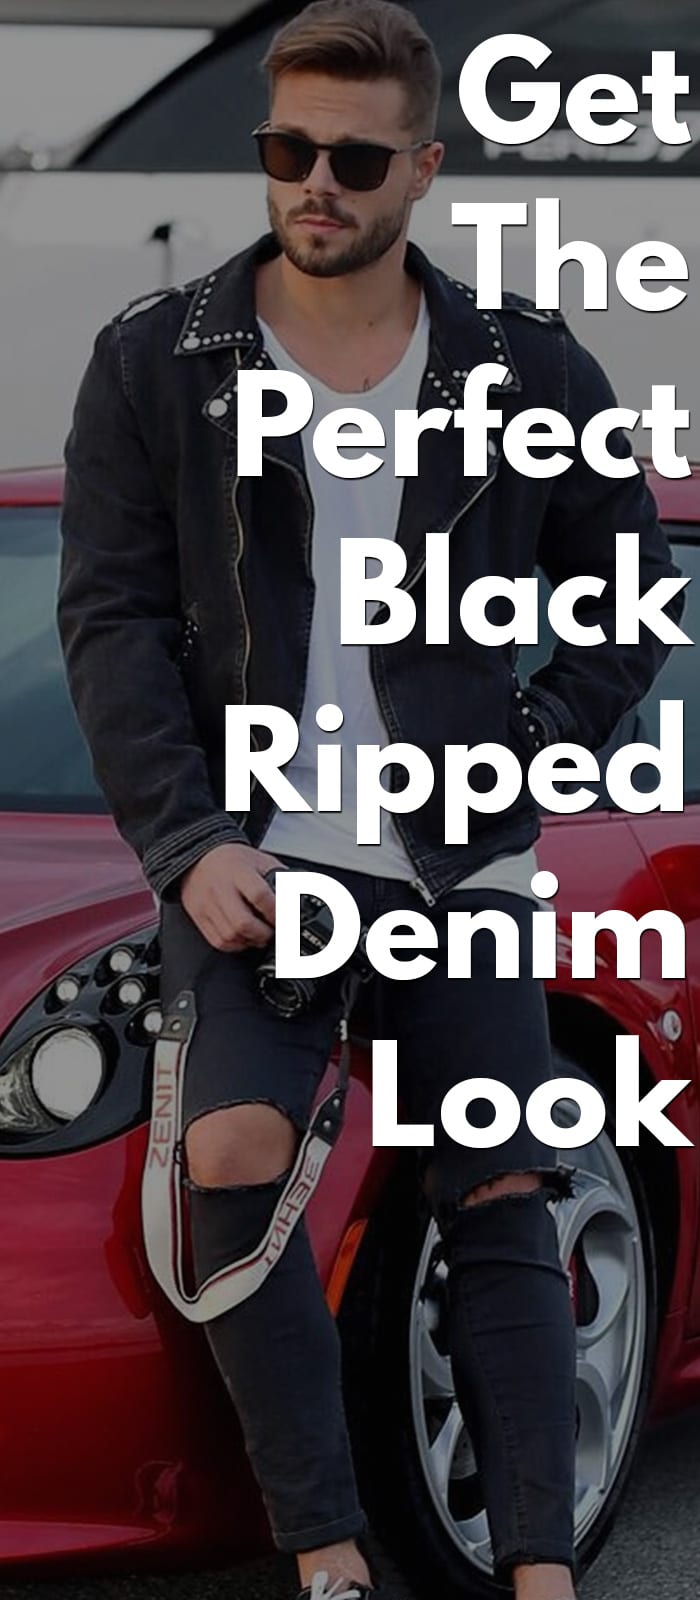 Get The Perfect Black Ripped Denim Look